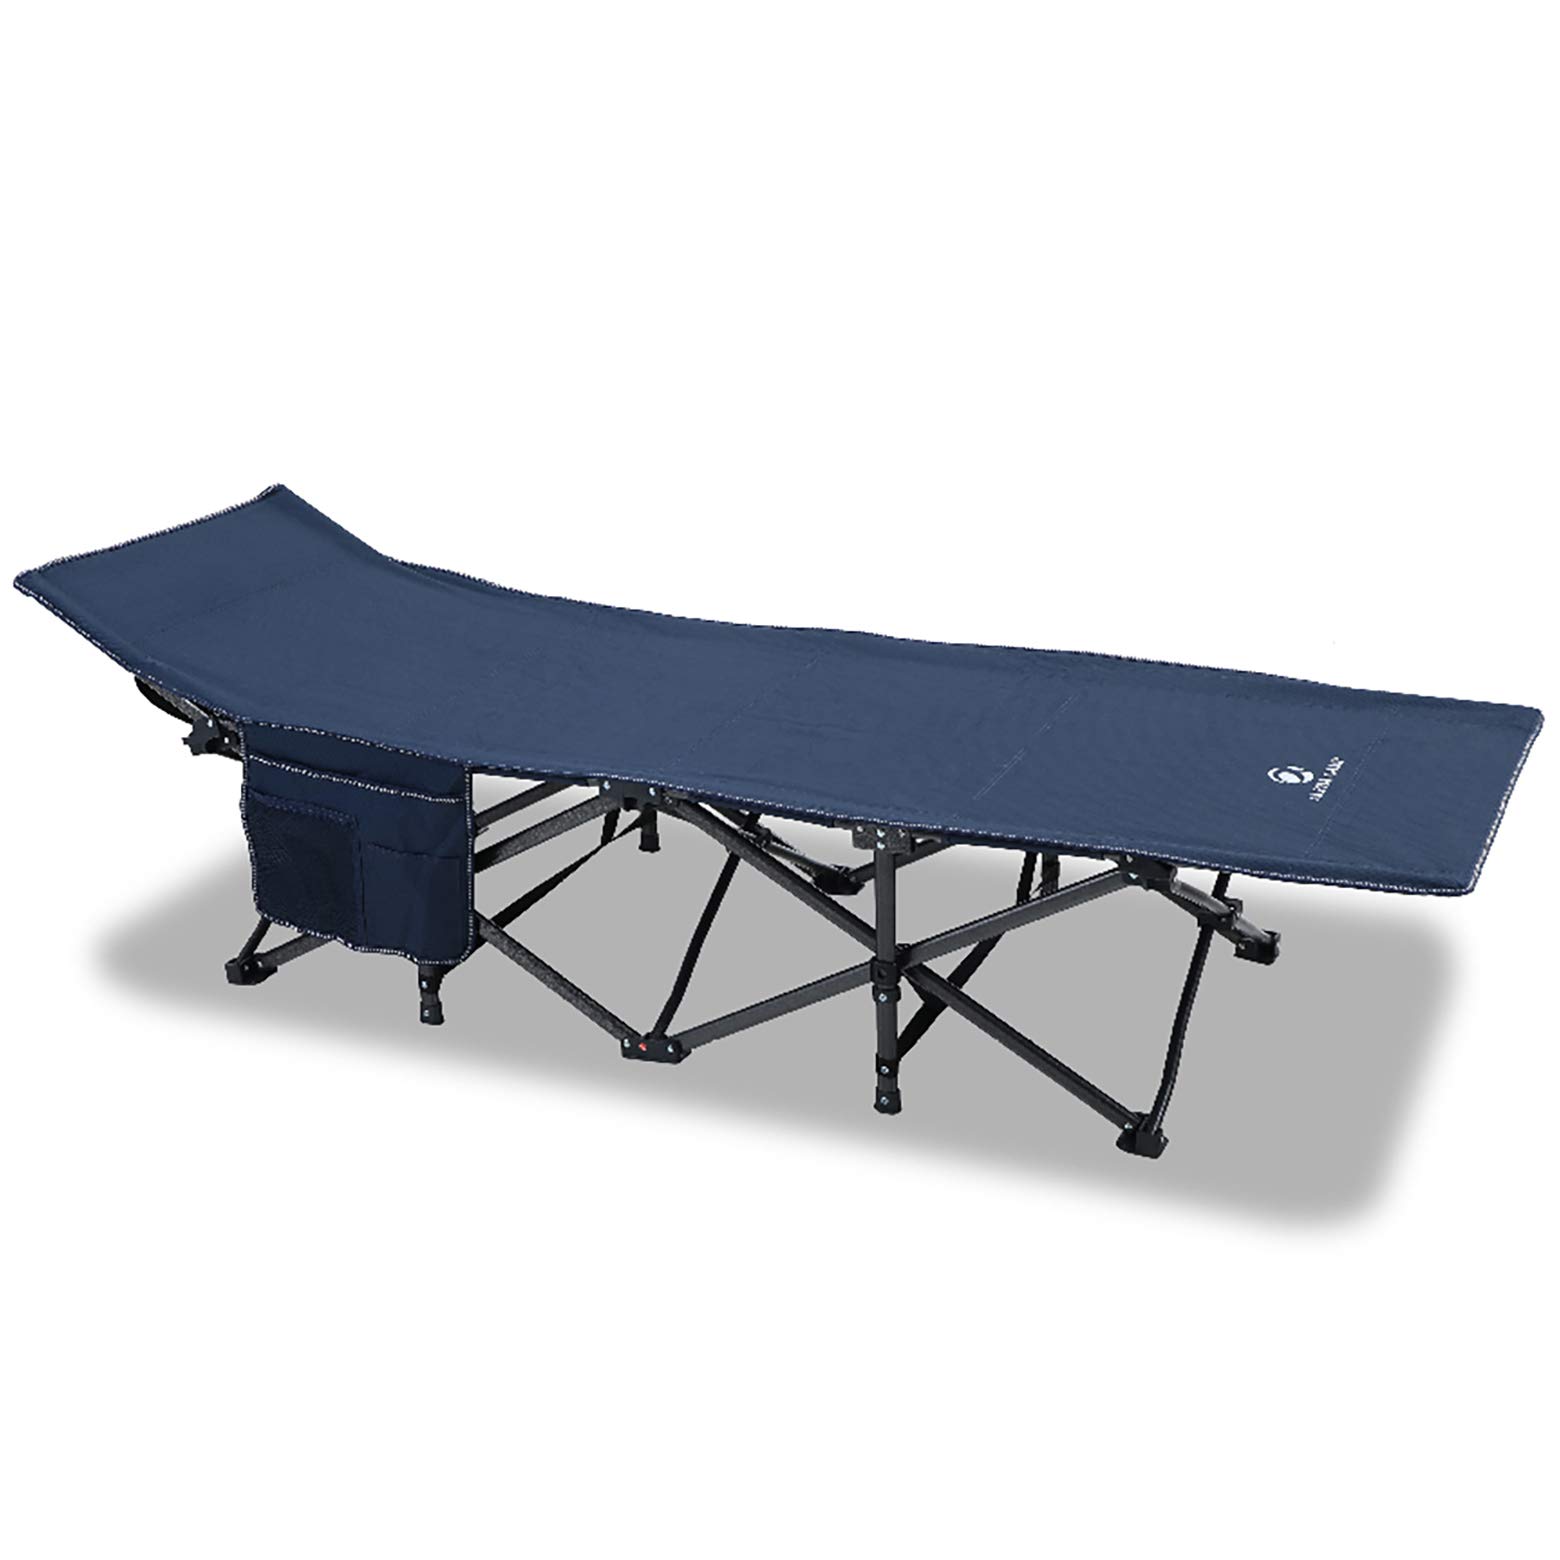 ALPHA CAMP Oversized Camping Cot Supports 600 lbs Sleeping Bed Folding Steel Frame Portable with Carry Bag,Navy